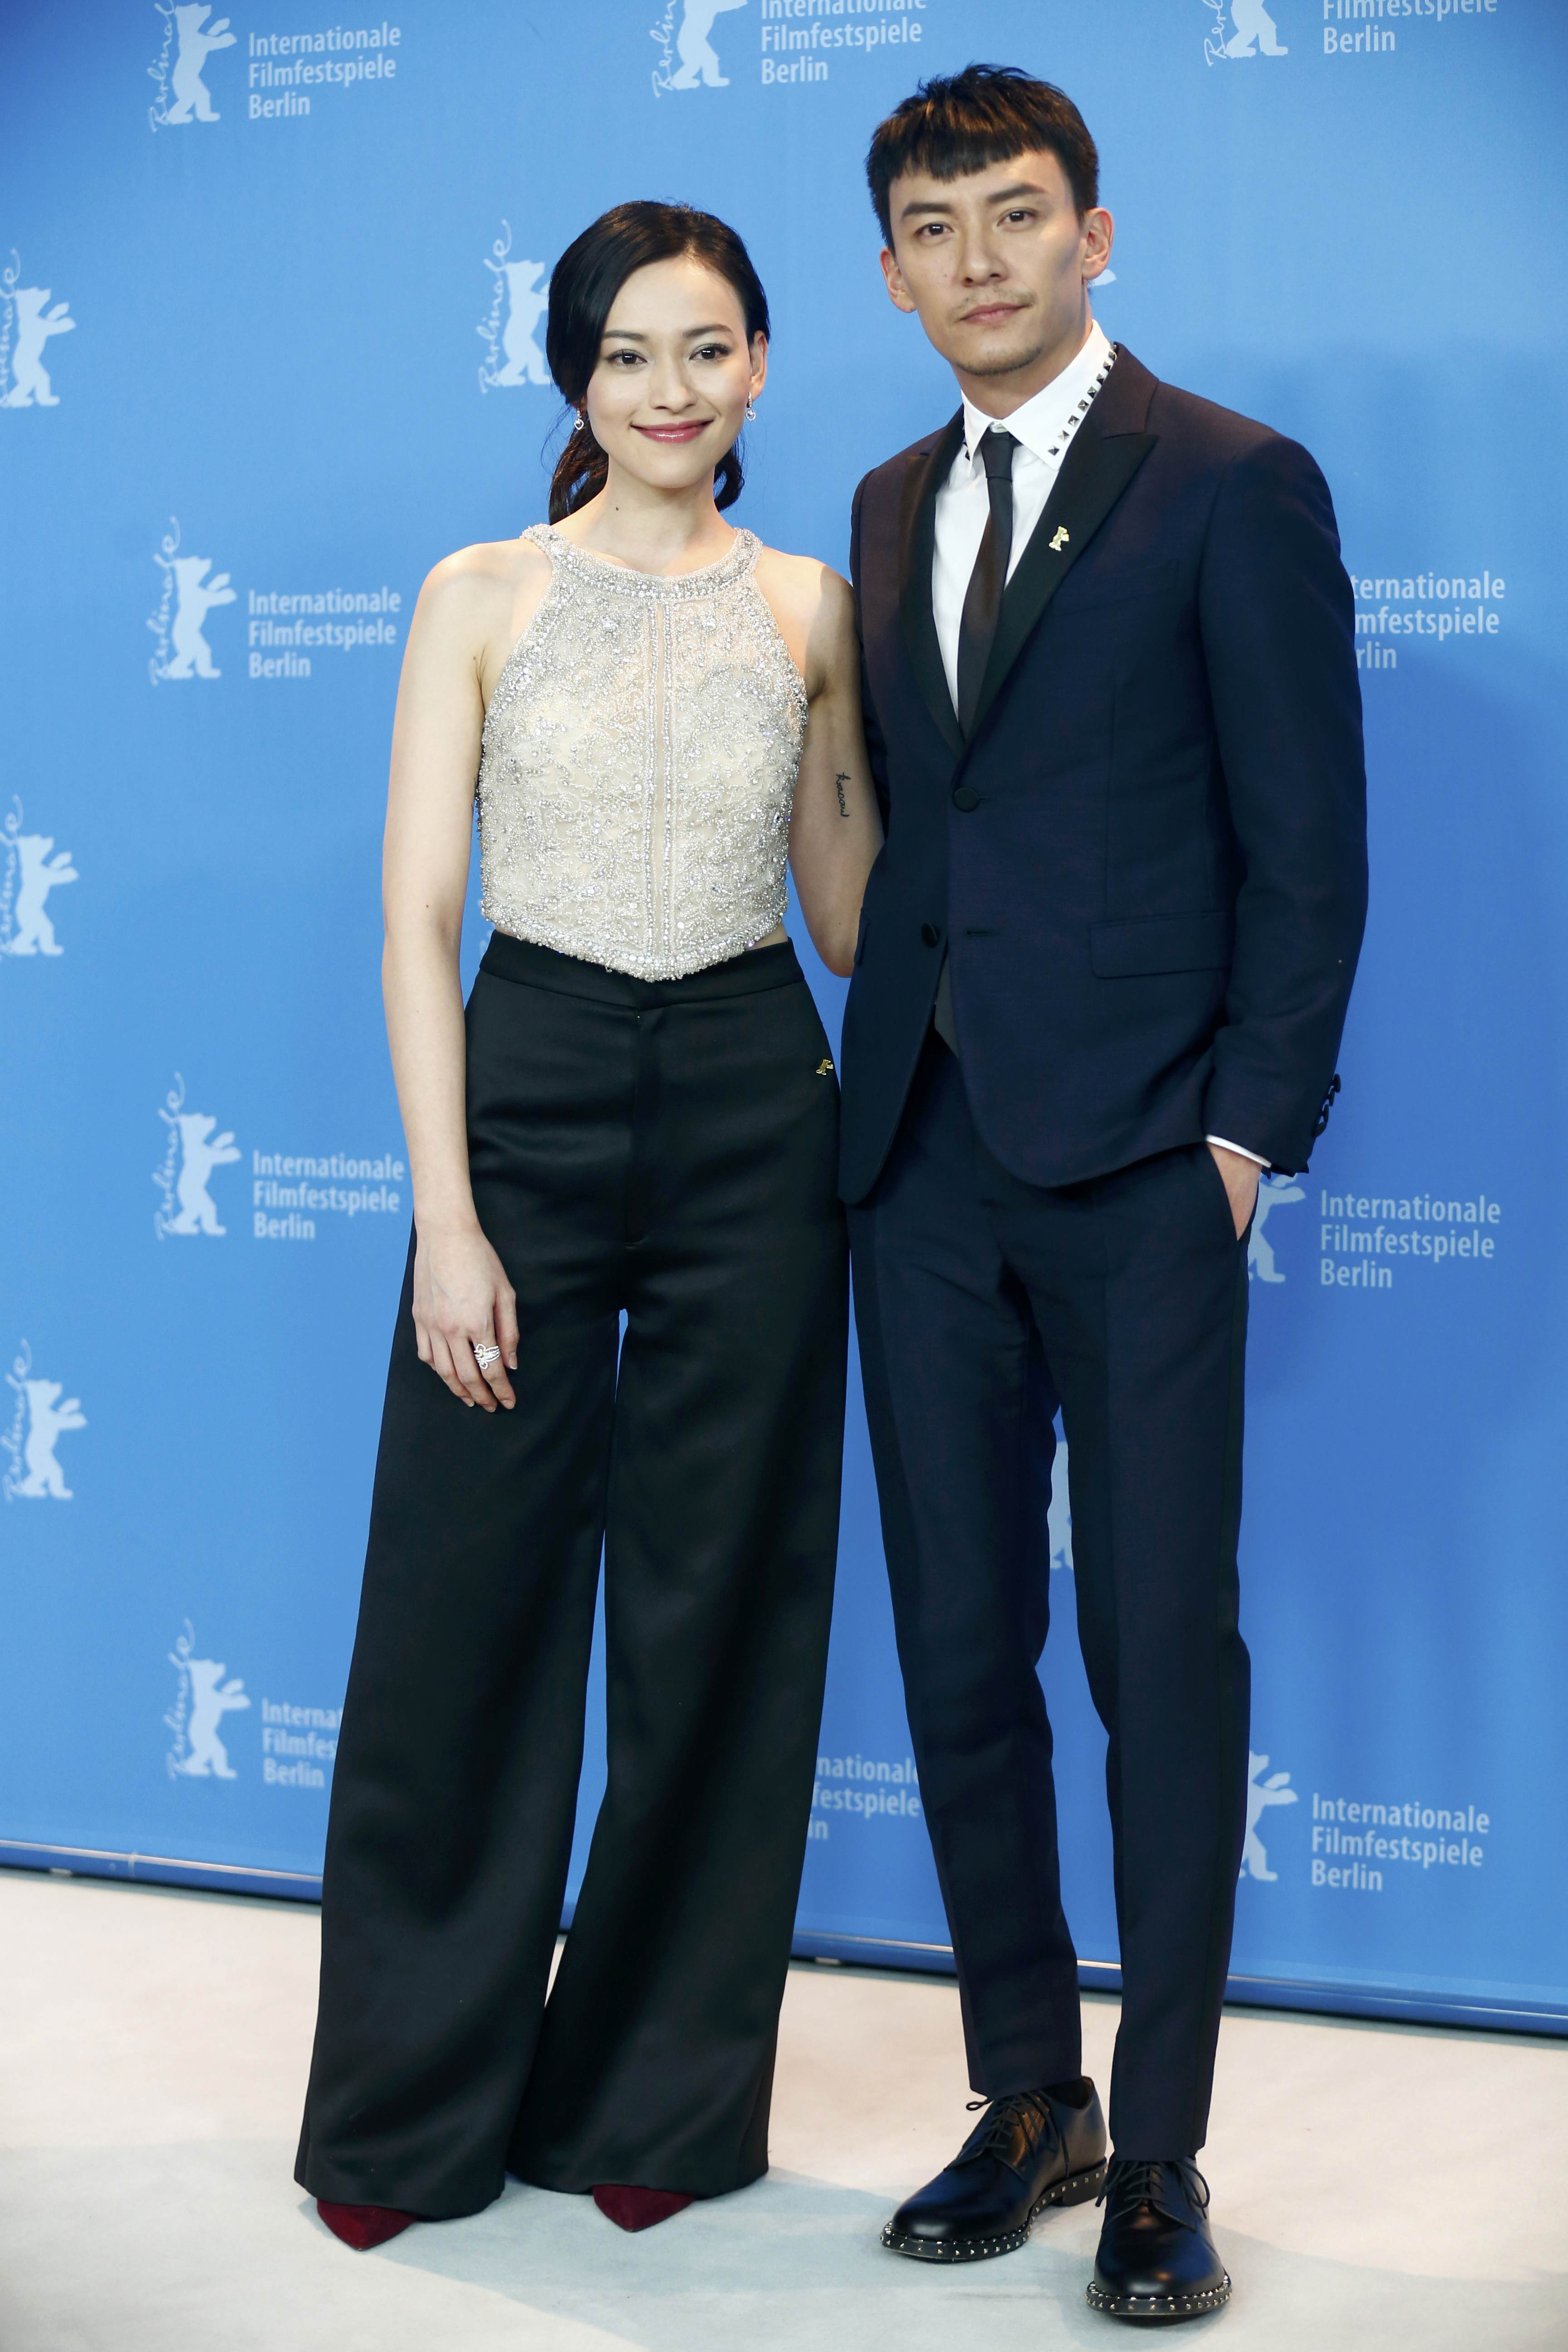 Actress Yiti Yao and actor Chen Chang pose during a photocall to promote the movie 'Mr. Long' at the 67th Berlinale International Film Festival in Berlin